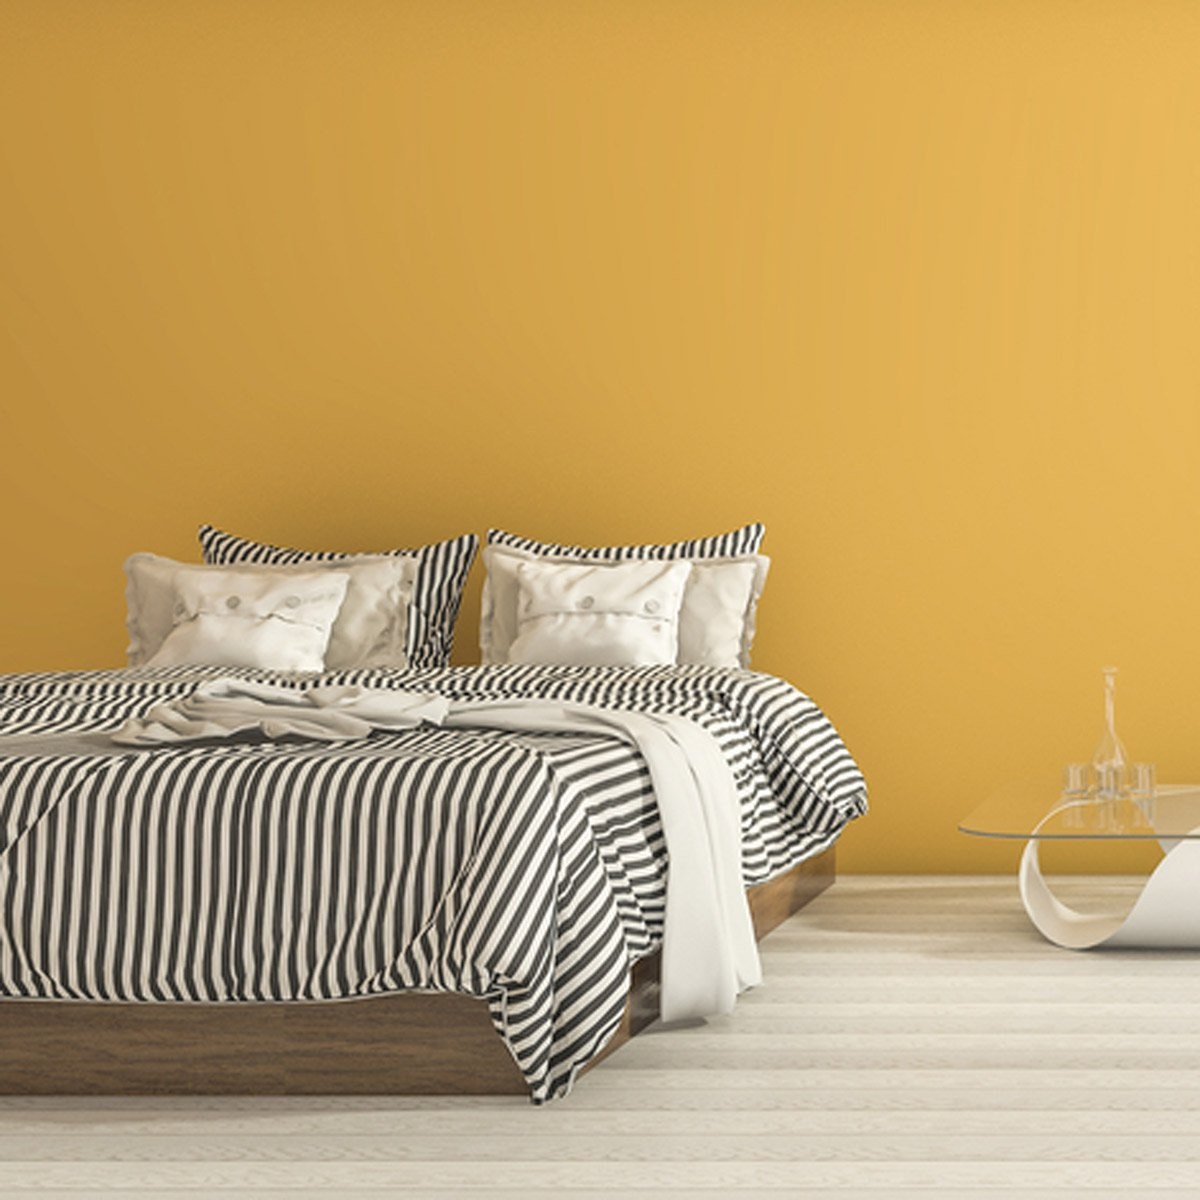 12 Fresh Bedroom Color Trends The Family Handyman within size 1200 X 1200